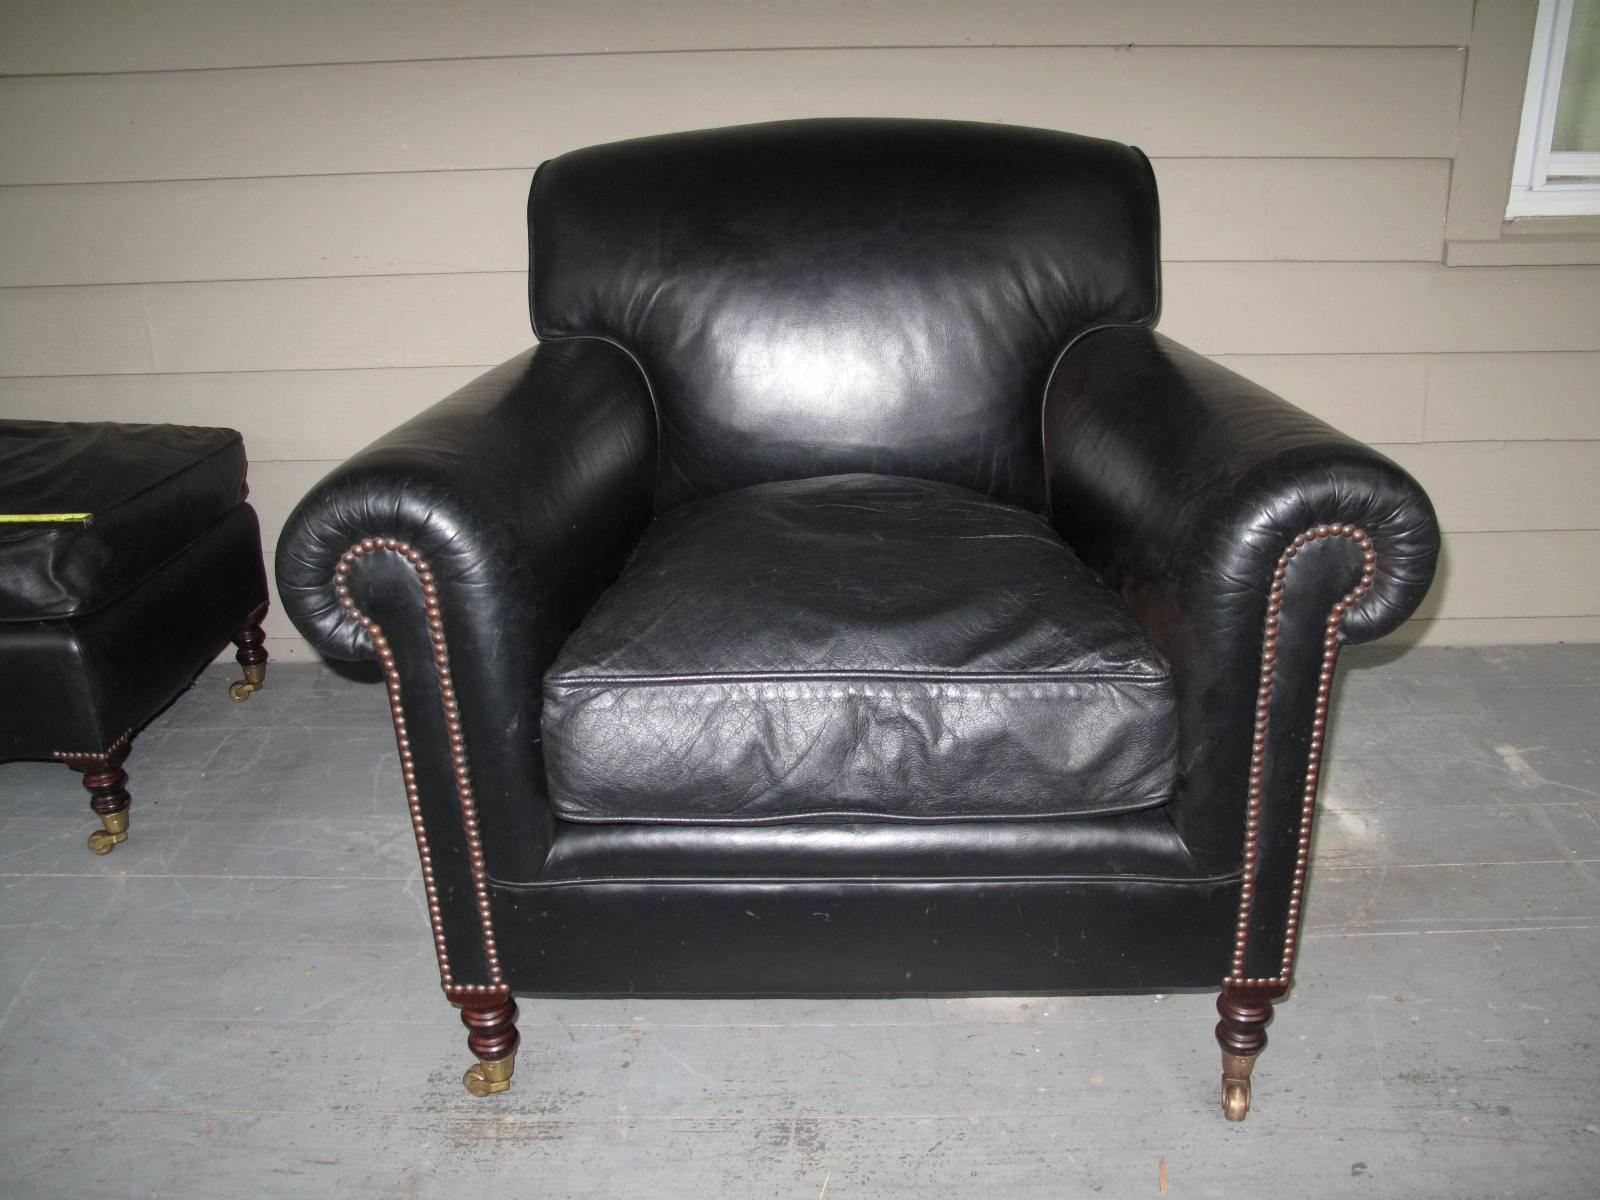 English made leather club chair, labelled George Smith. Casters on turned legs. Single down cushion. 

Ottoman measures:
21